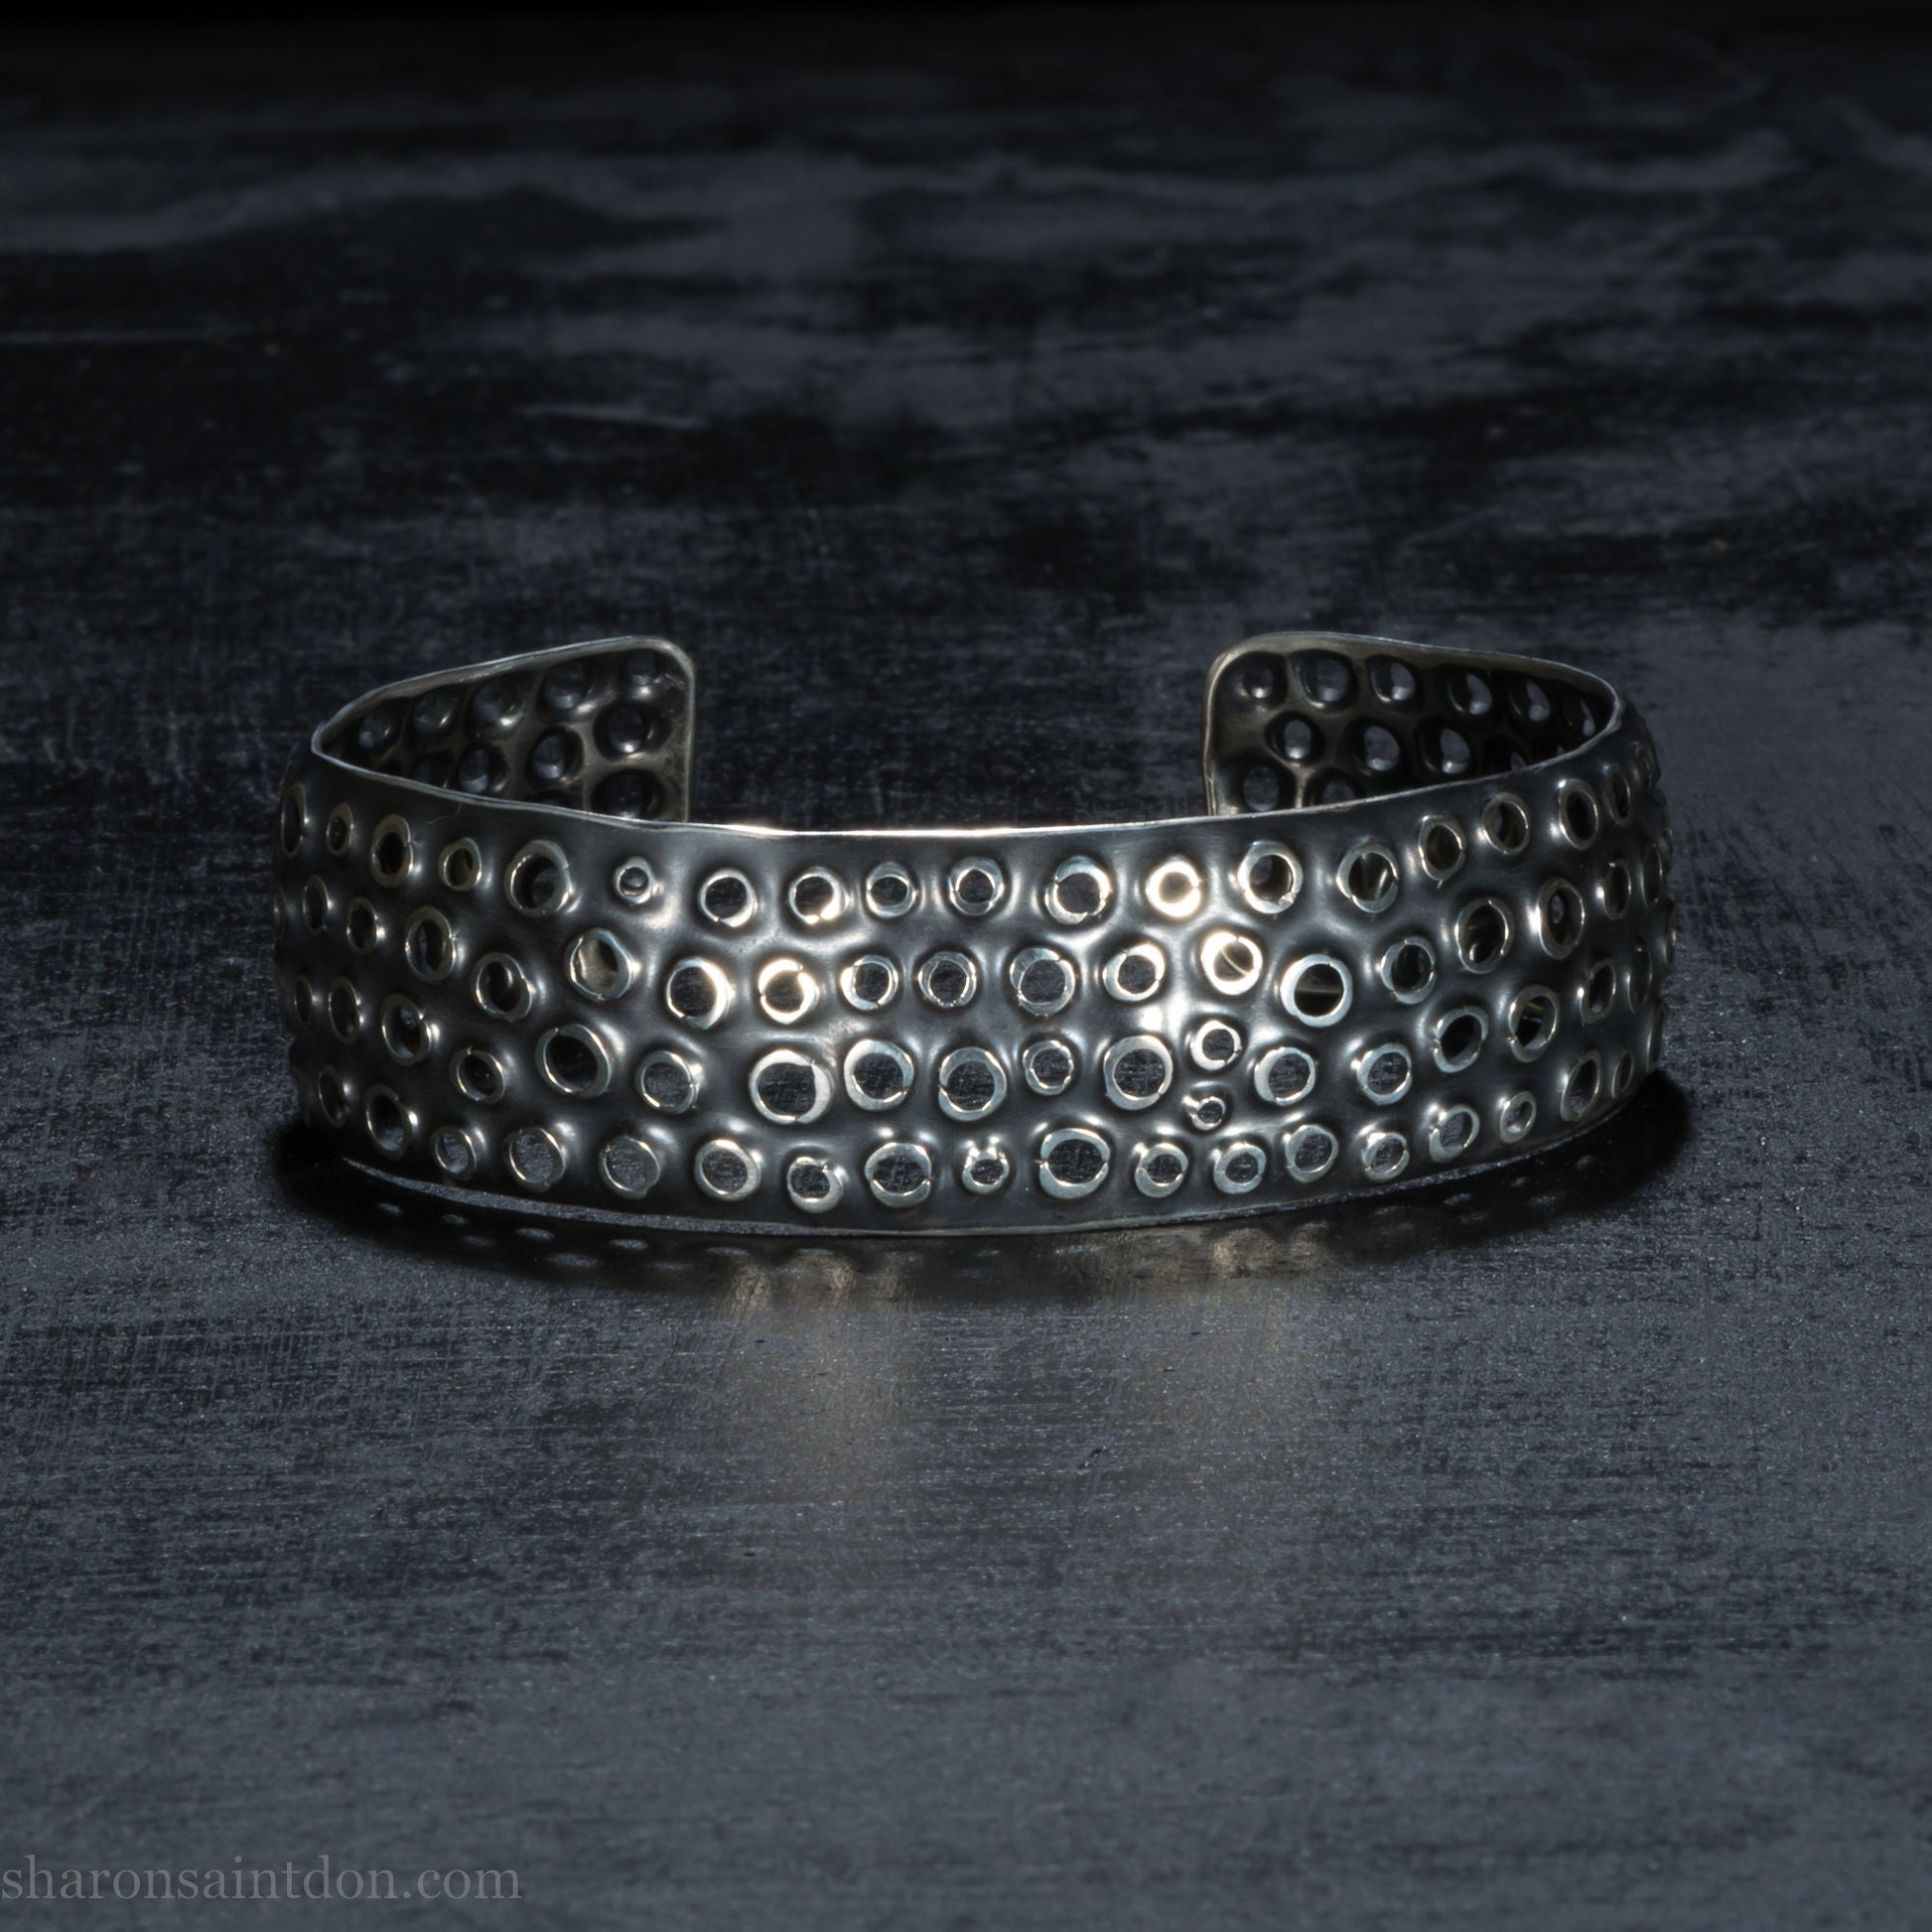 925 sterling silver cuff bracelet handmade in USA. 2cm wide, 40cm x 60cm oval with approximately 28mm flexible opening for wrist. Punched perforated hole texture, oxidized black and rubbed back to show circles as white shiny silver.